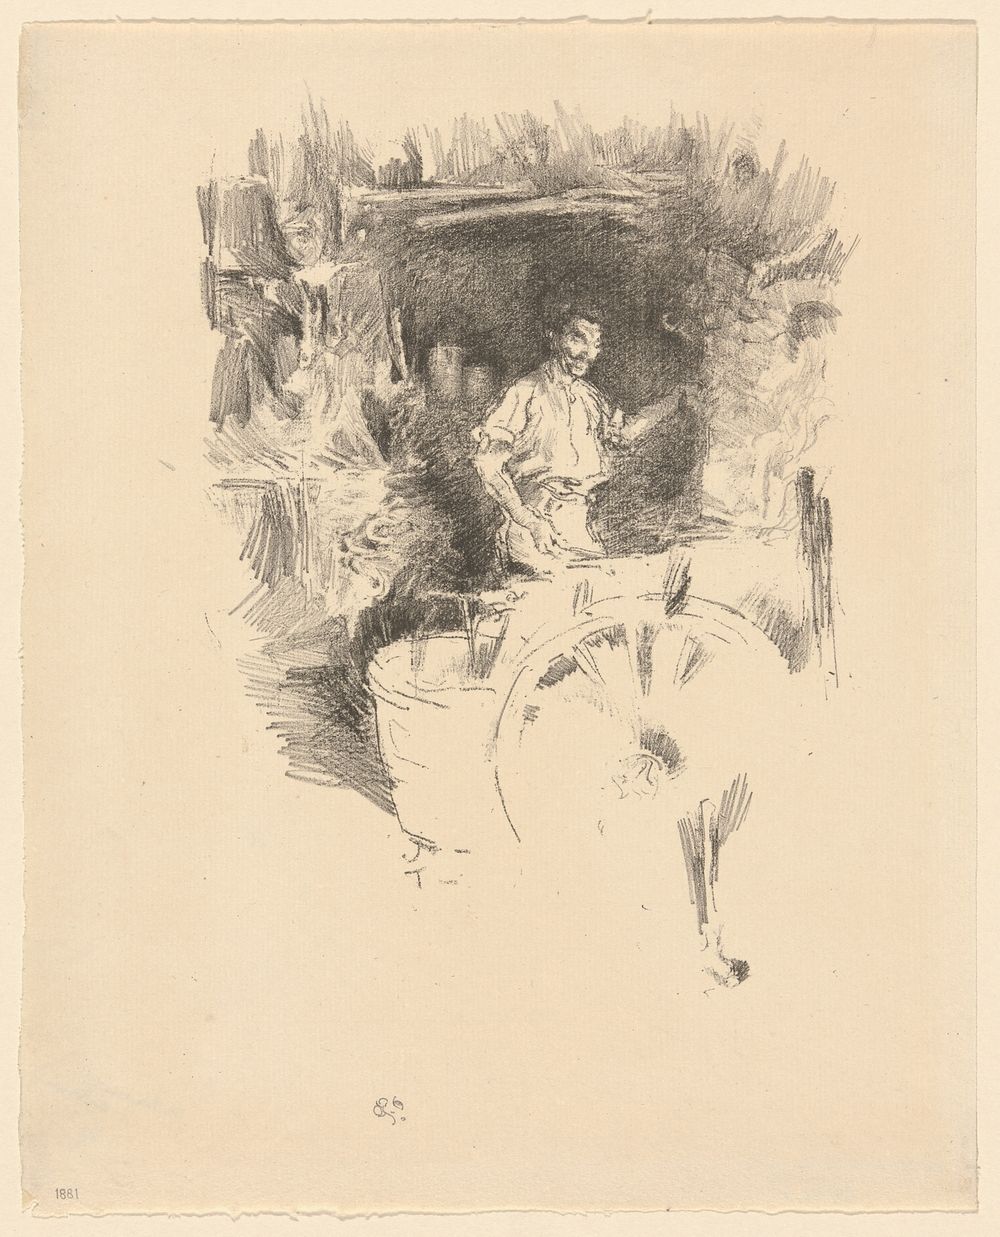 The Blacksmith by James McNeill Whistler